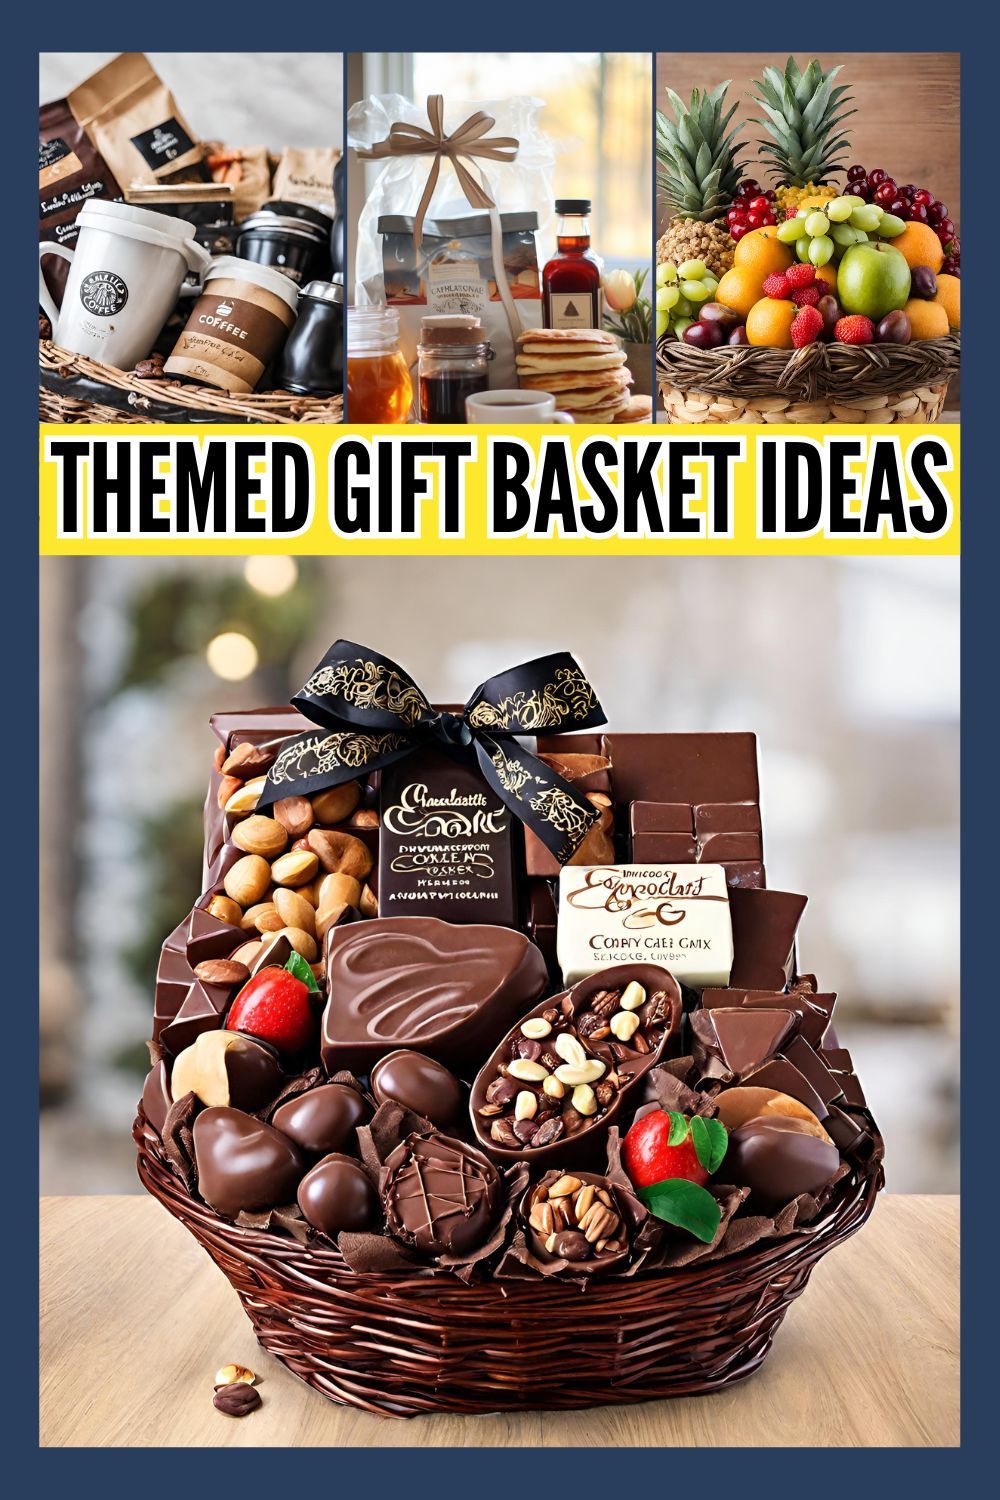 Collage of 4 themed gift baskets - coffee lover basket, breakfast in bed basket with pancakes and fruit, assorted fruit healthy basket, chocolate gift basket